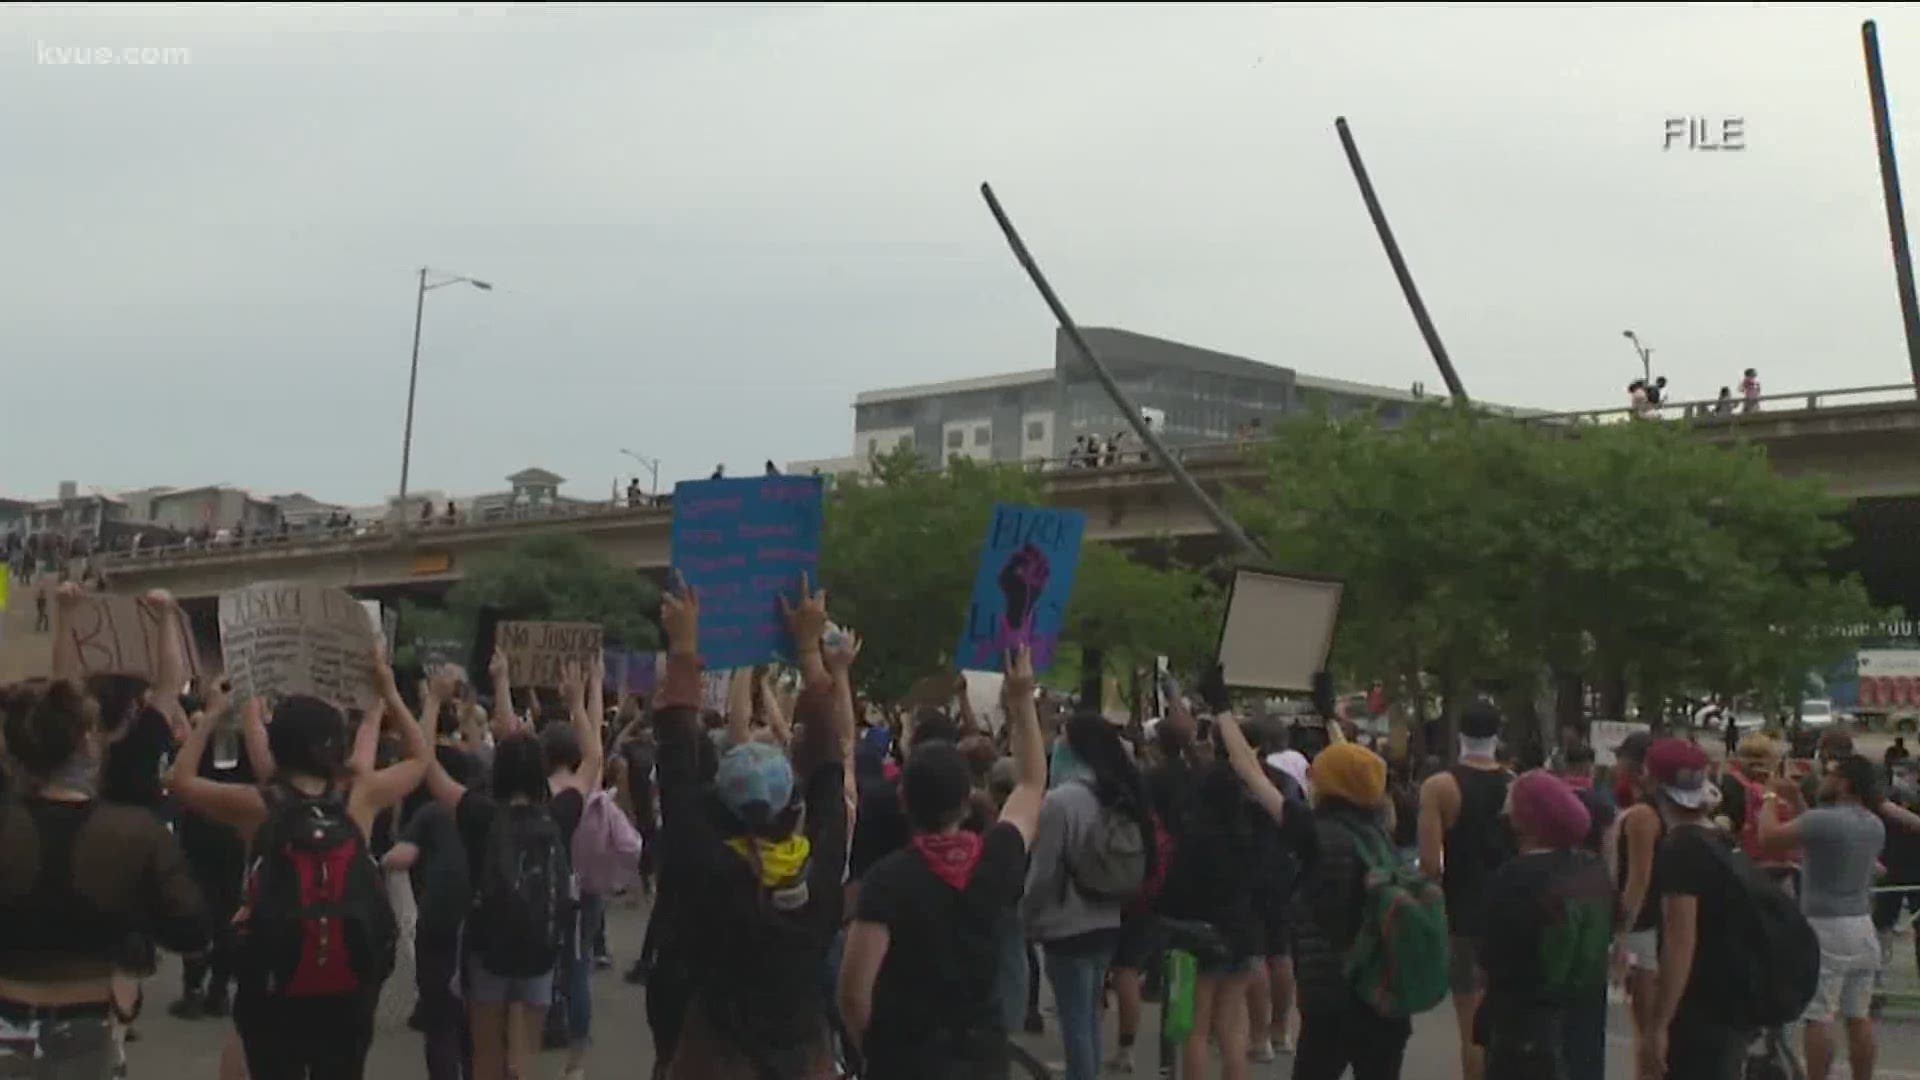 One man is suing the City of Austin and three police officers following the protests that happened in late May.